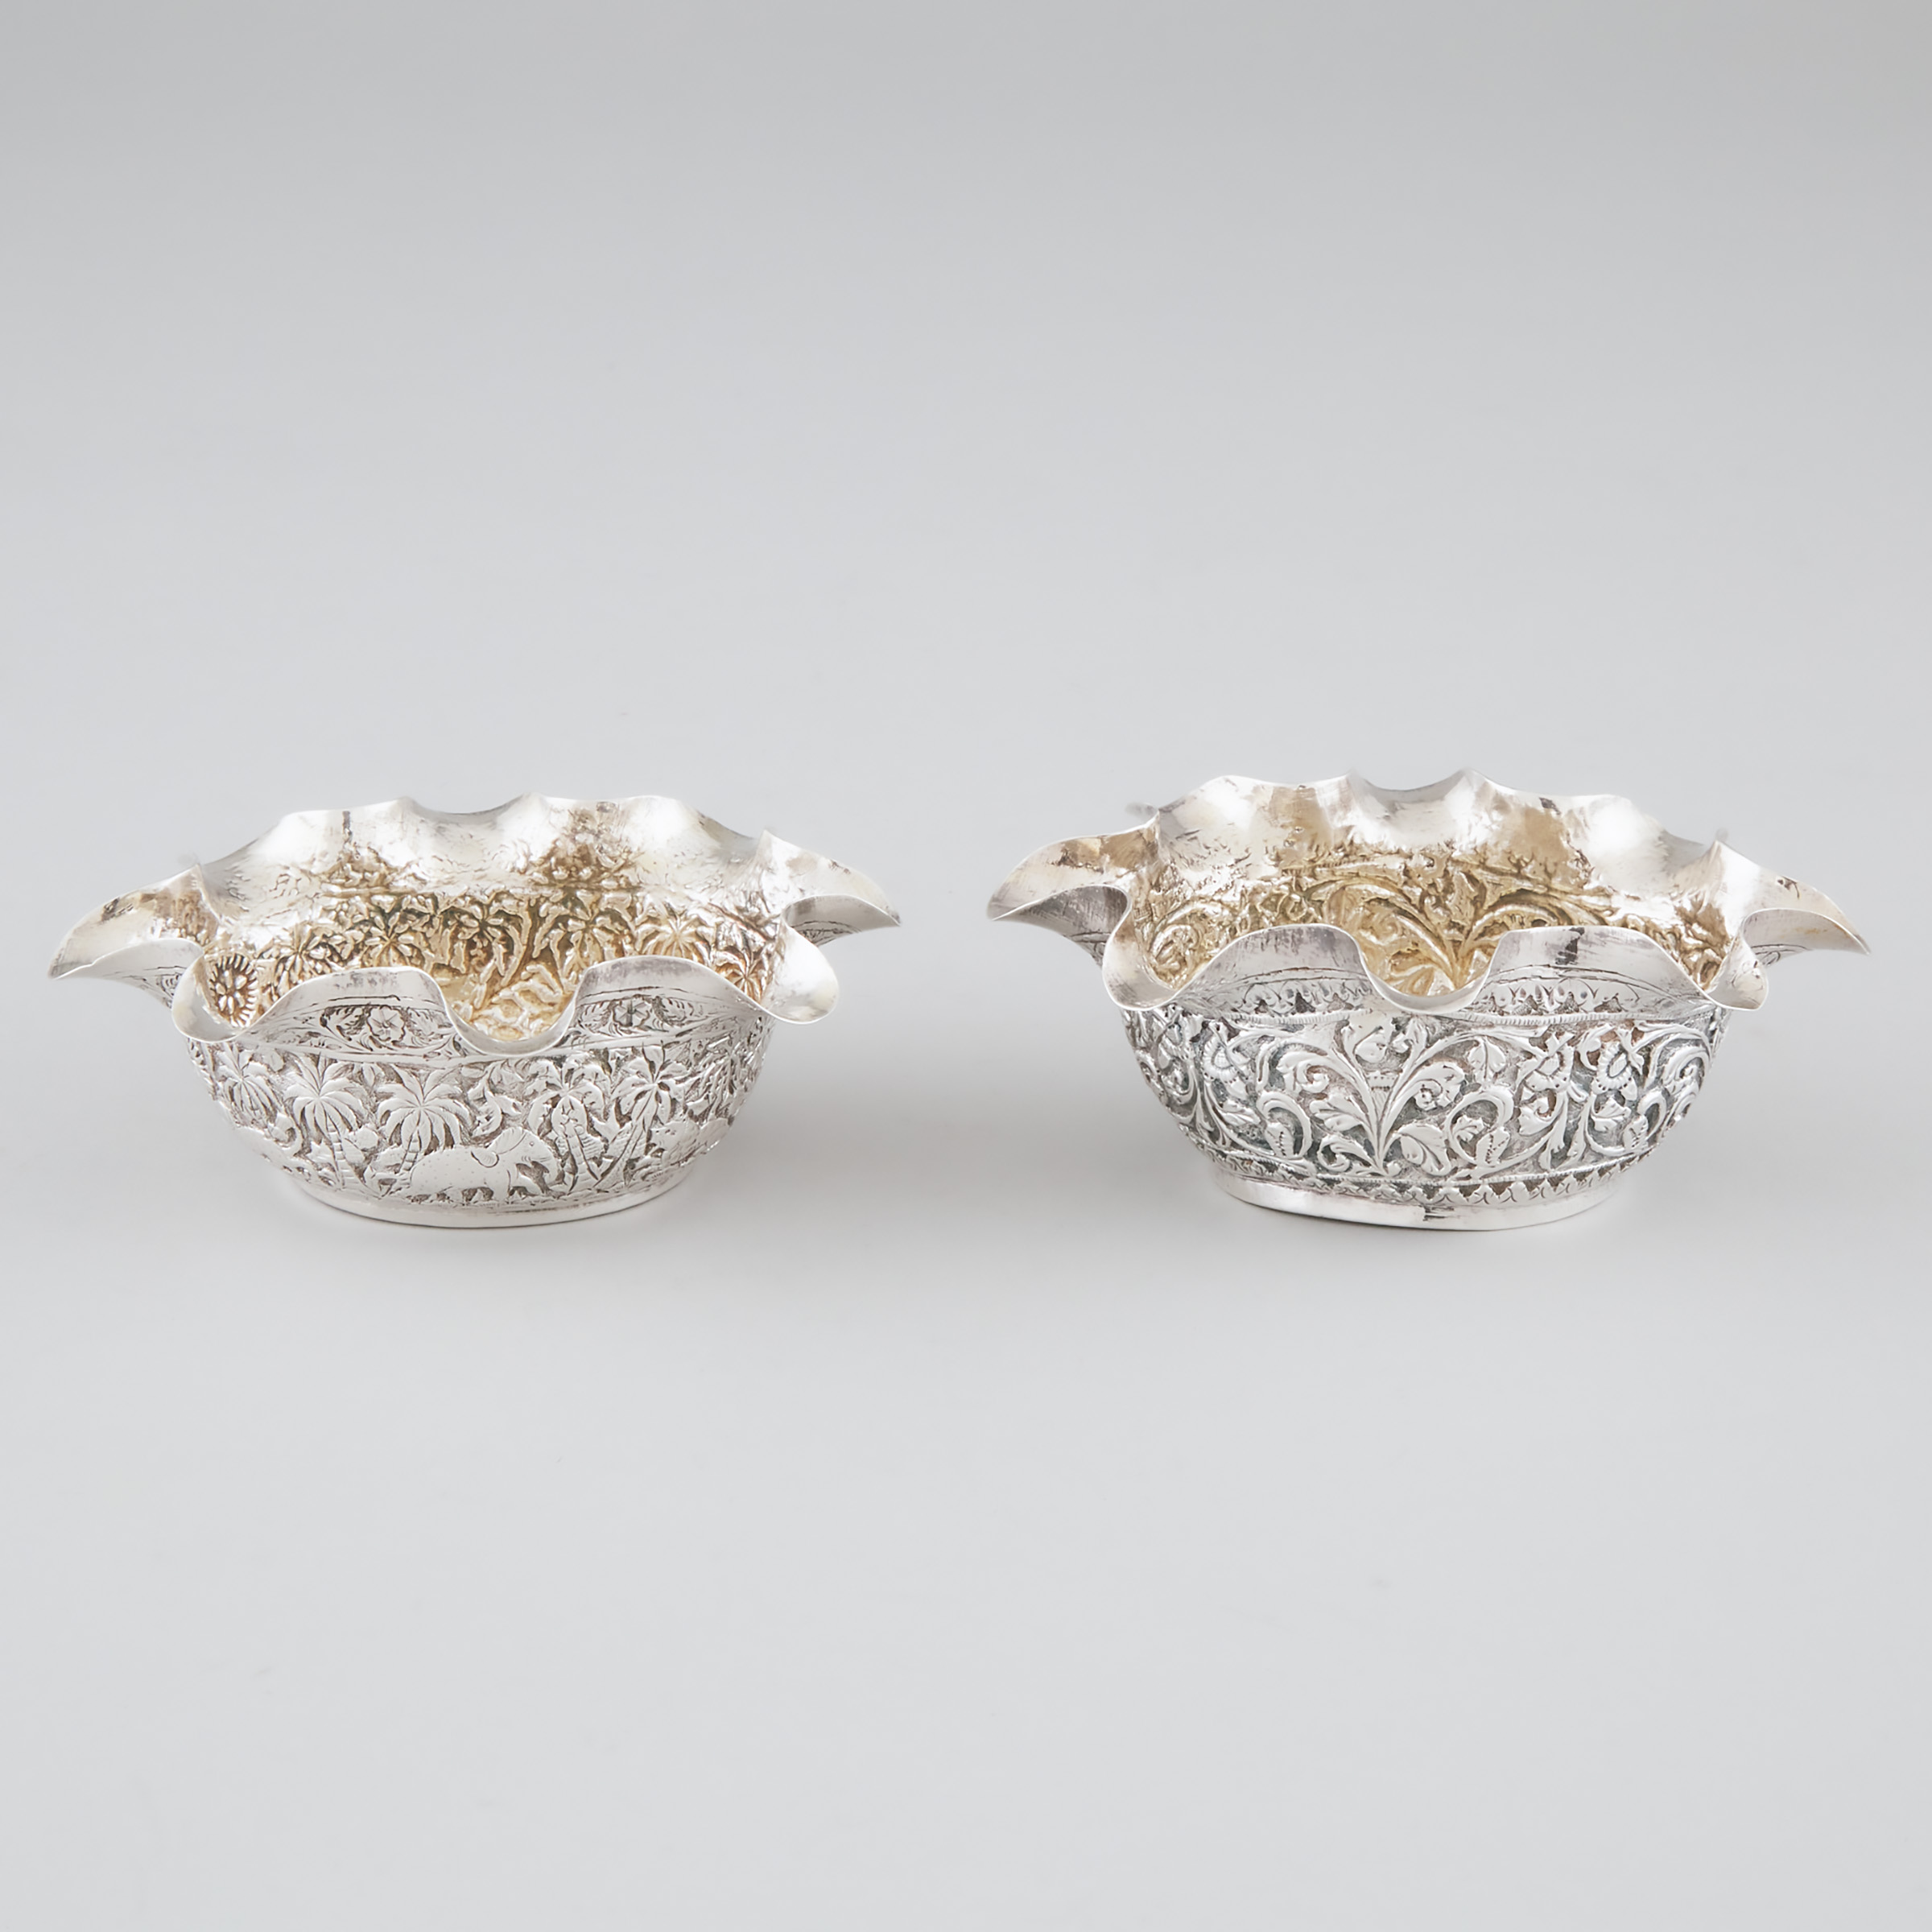 Two Burmese Silver Small Oval Bowls, early 20th century